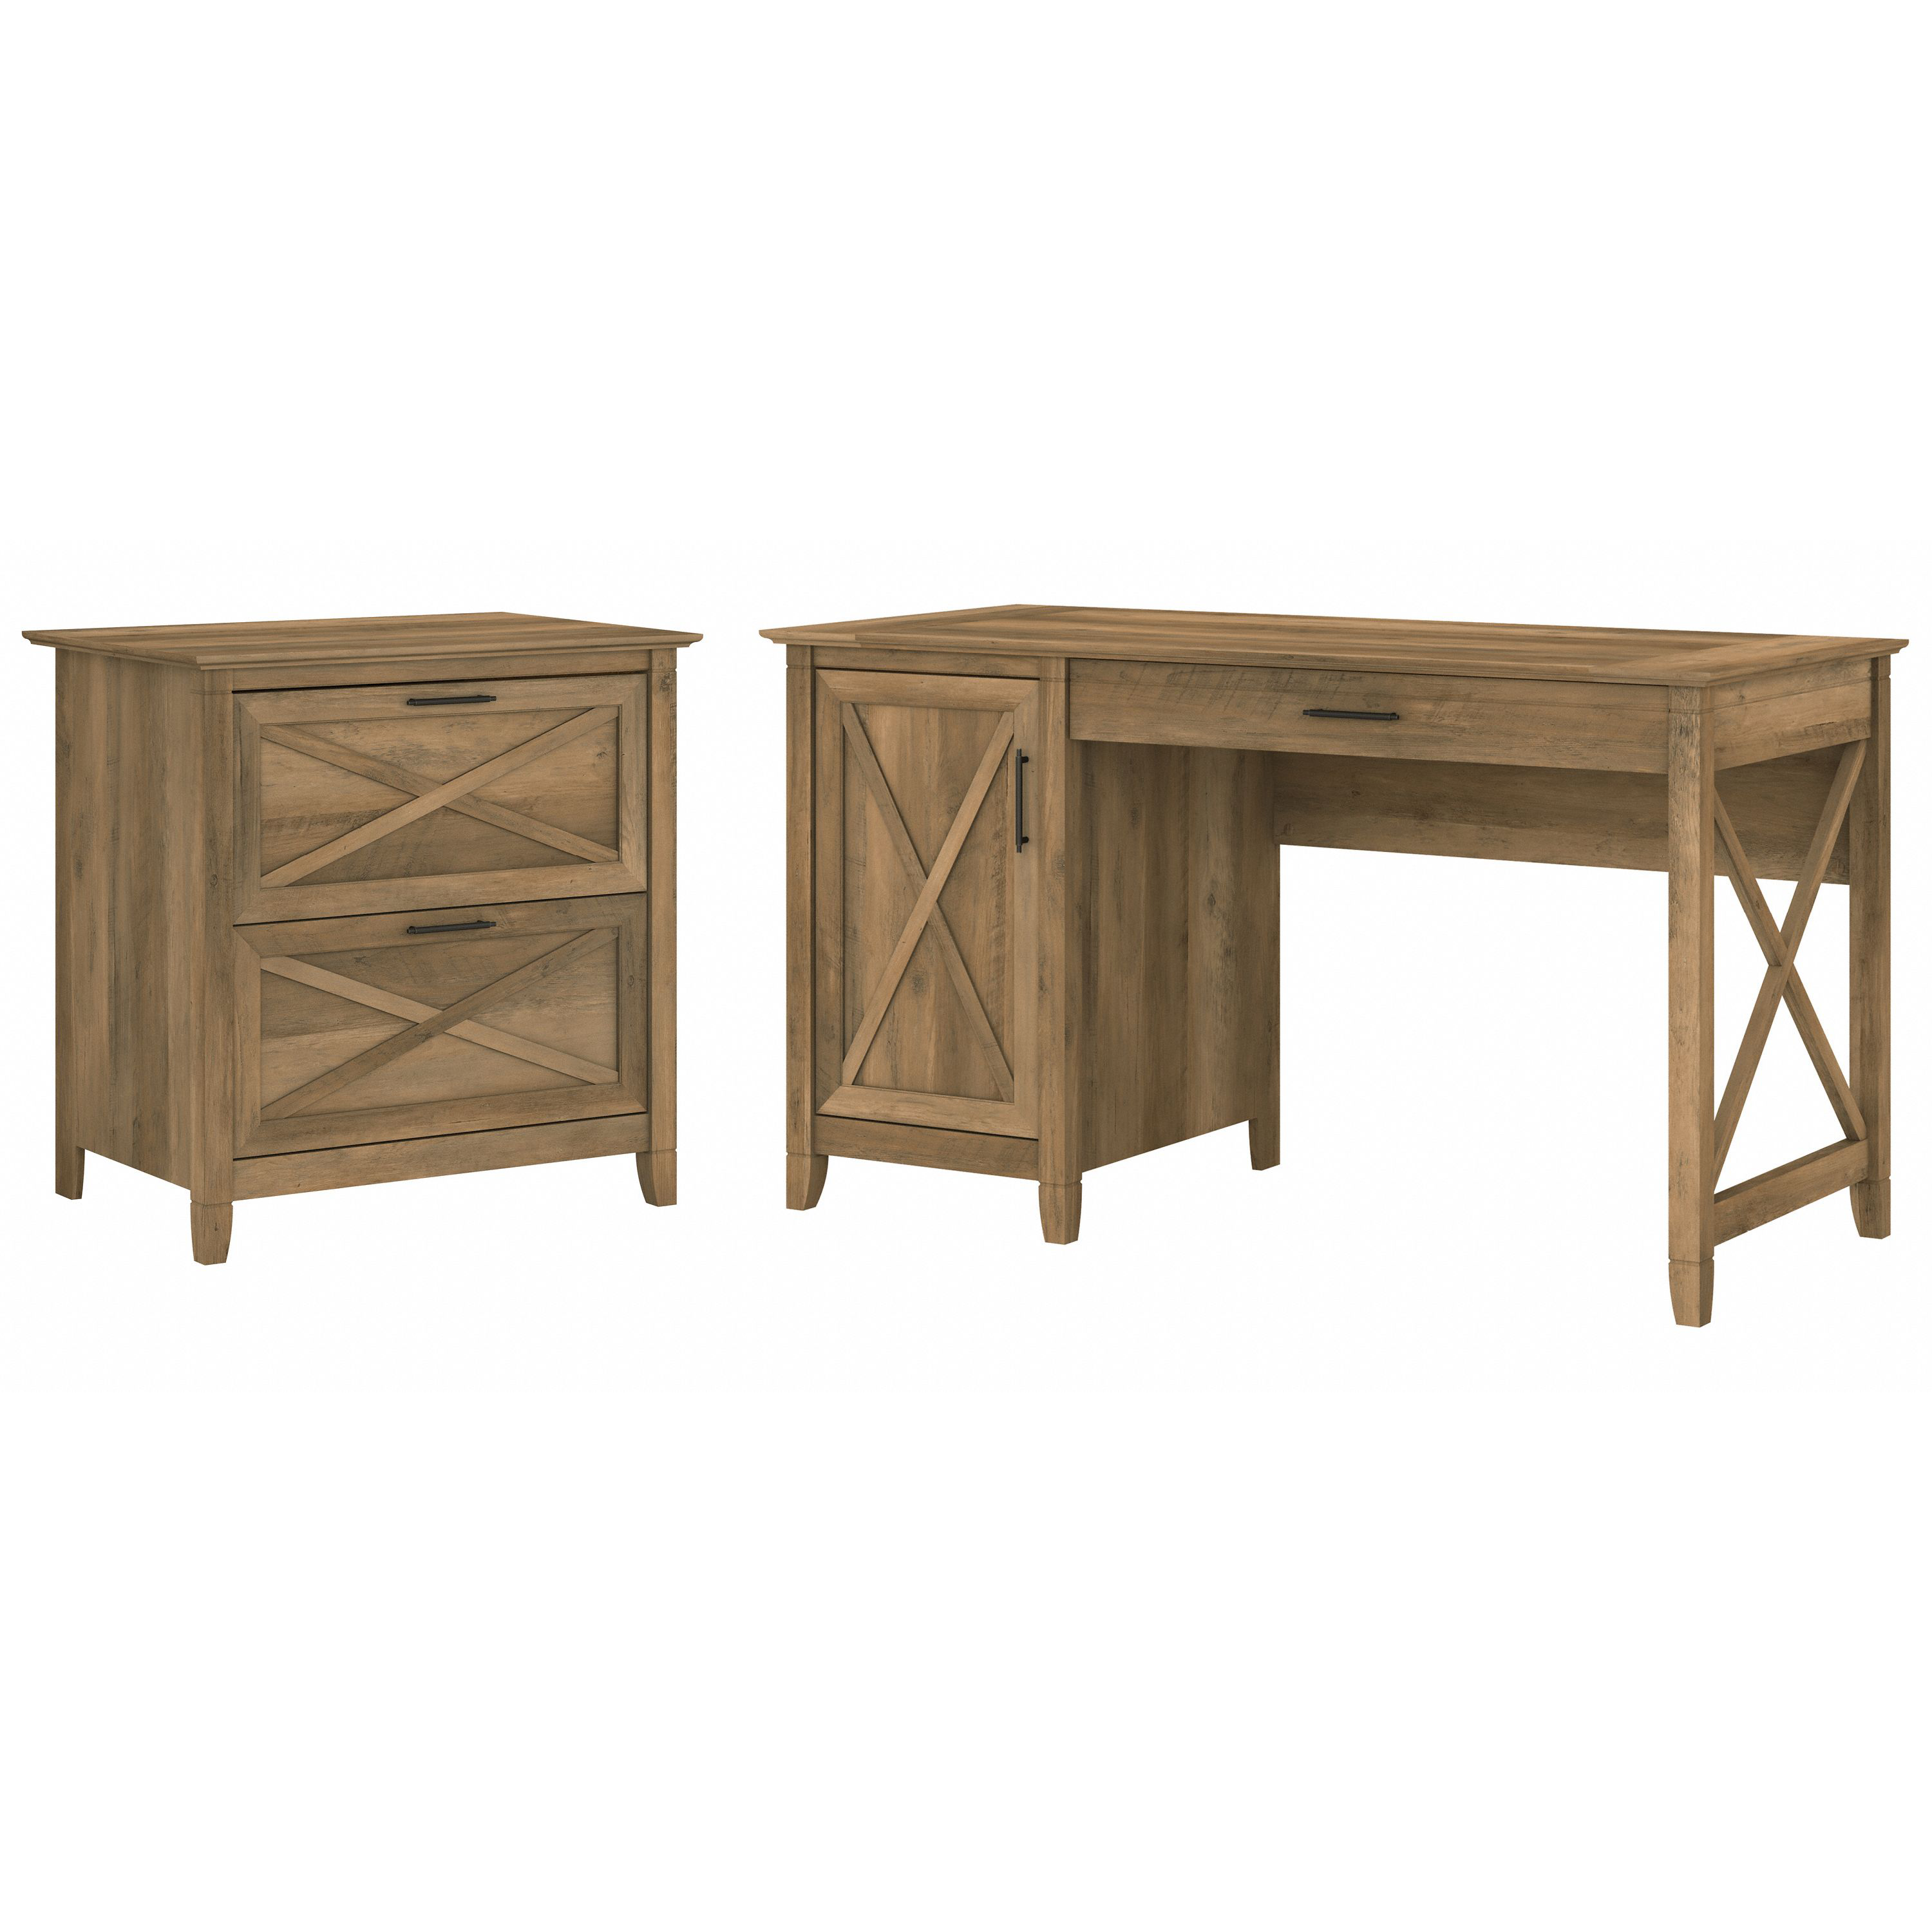 Shop Bush Furniture Key West 54W Computer Desk with Storage and 2 Drawer Lateral File Cabinet 02 KWS008RCP #color_reclaimed pine